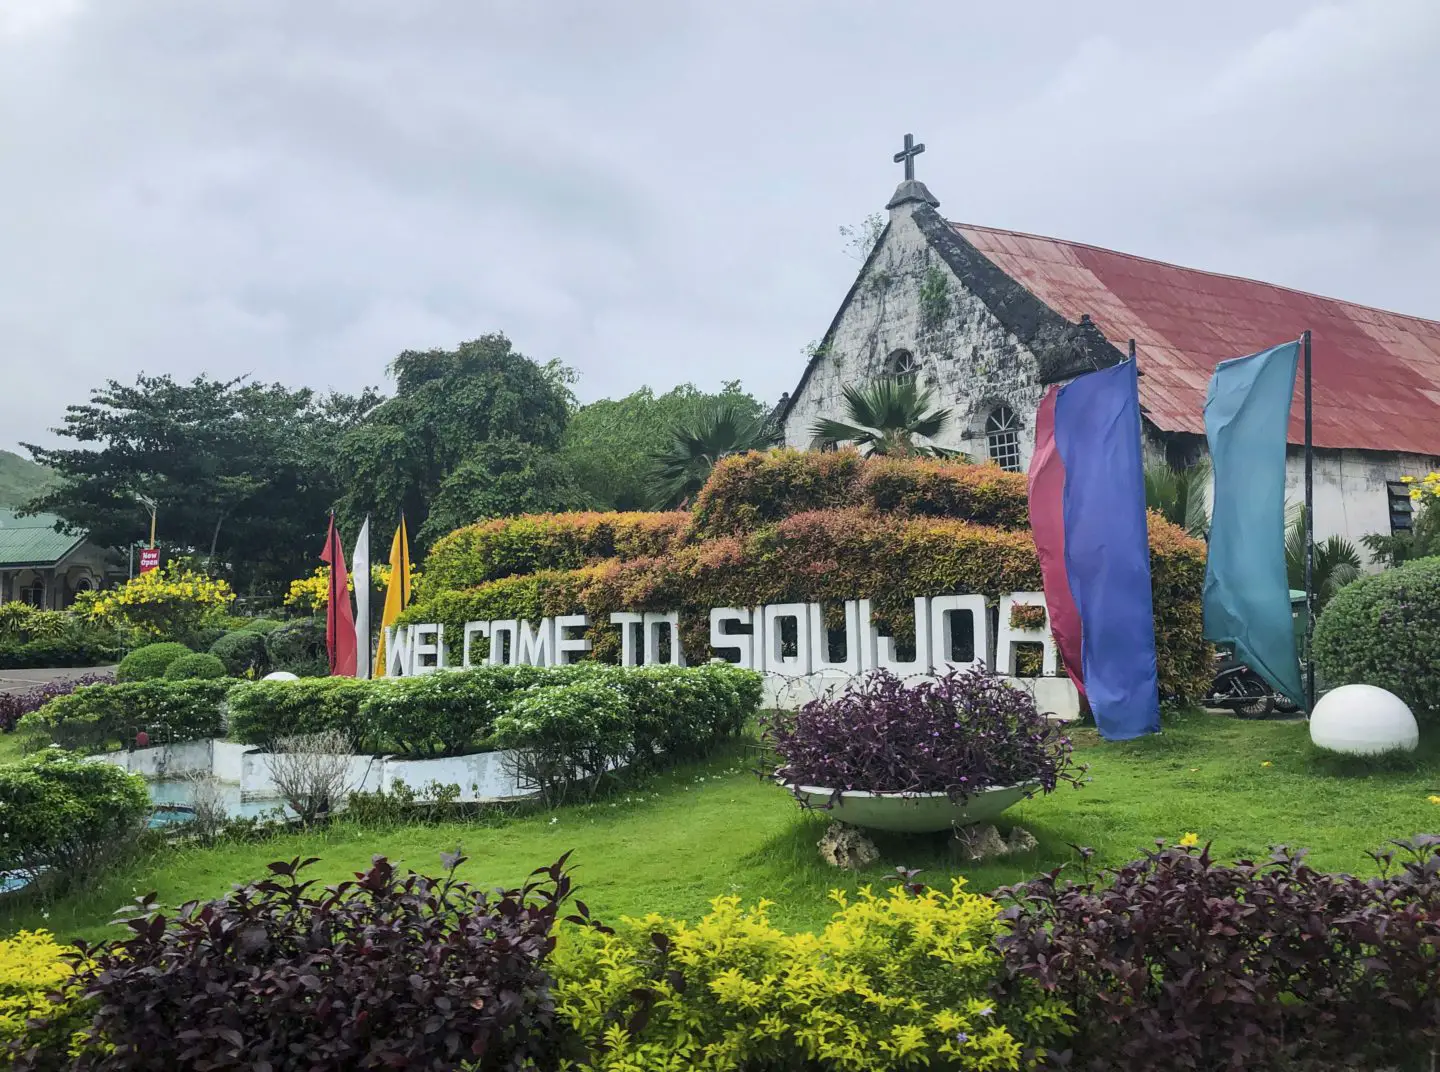 Welcome to Siquijor